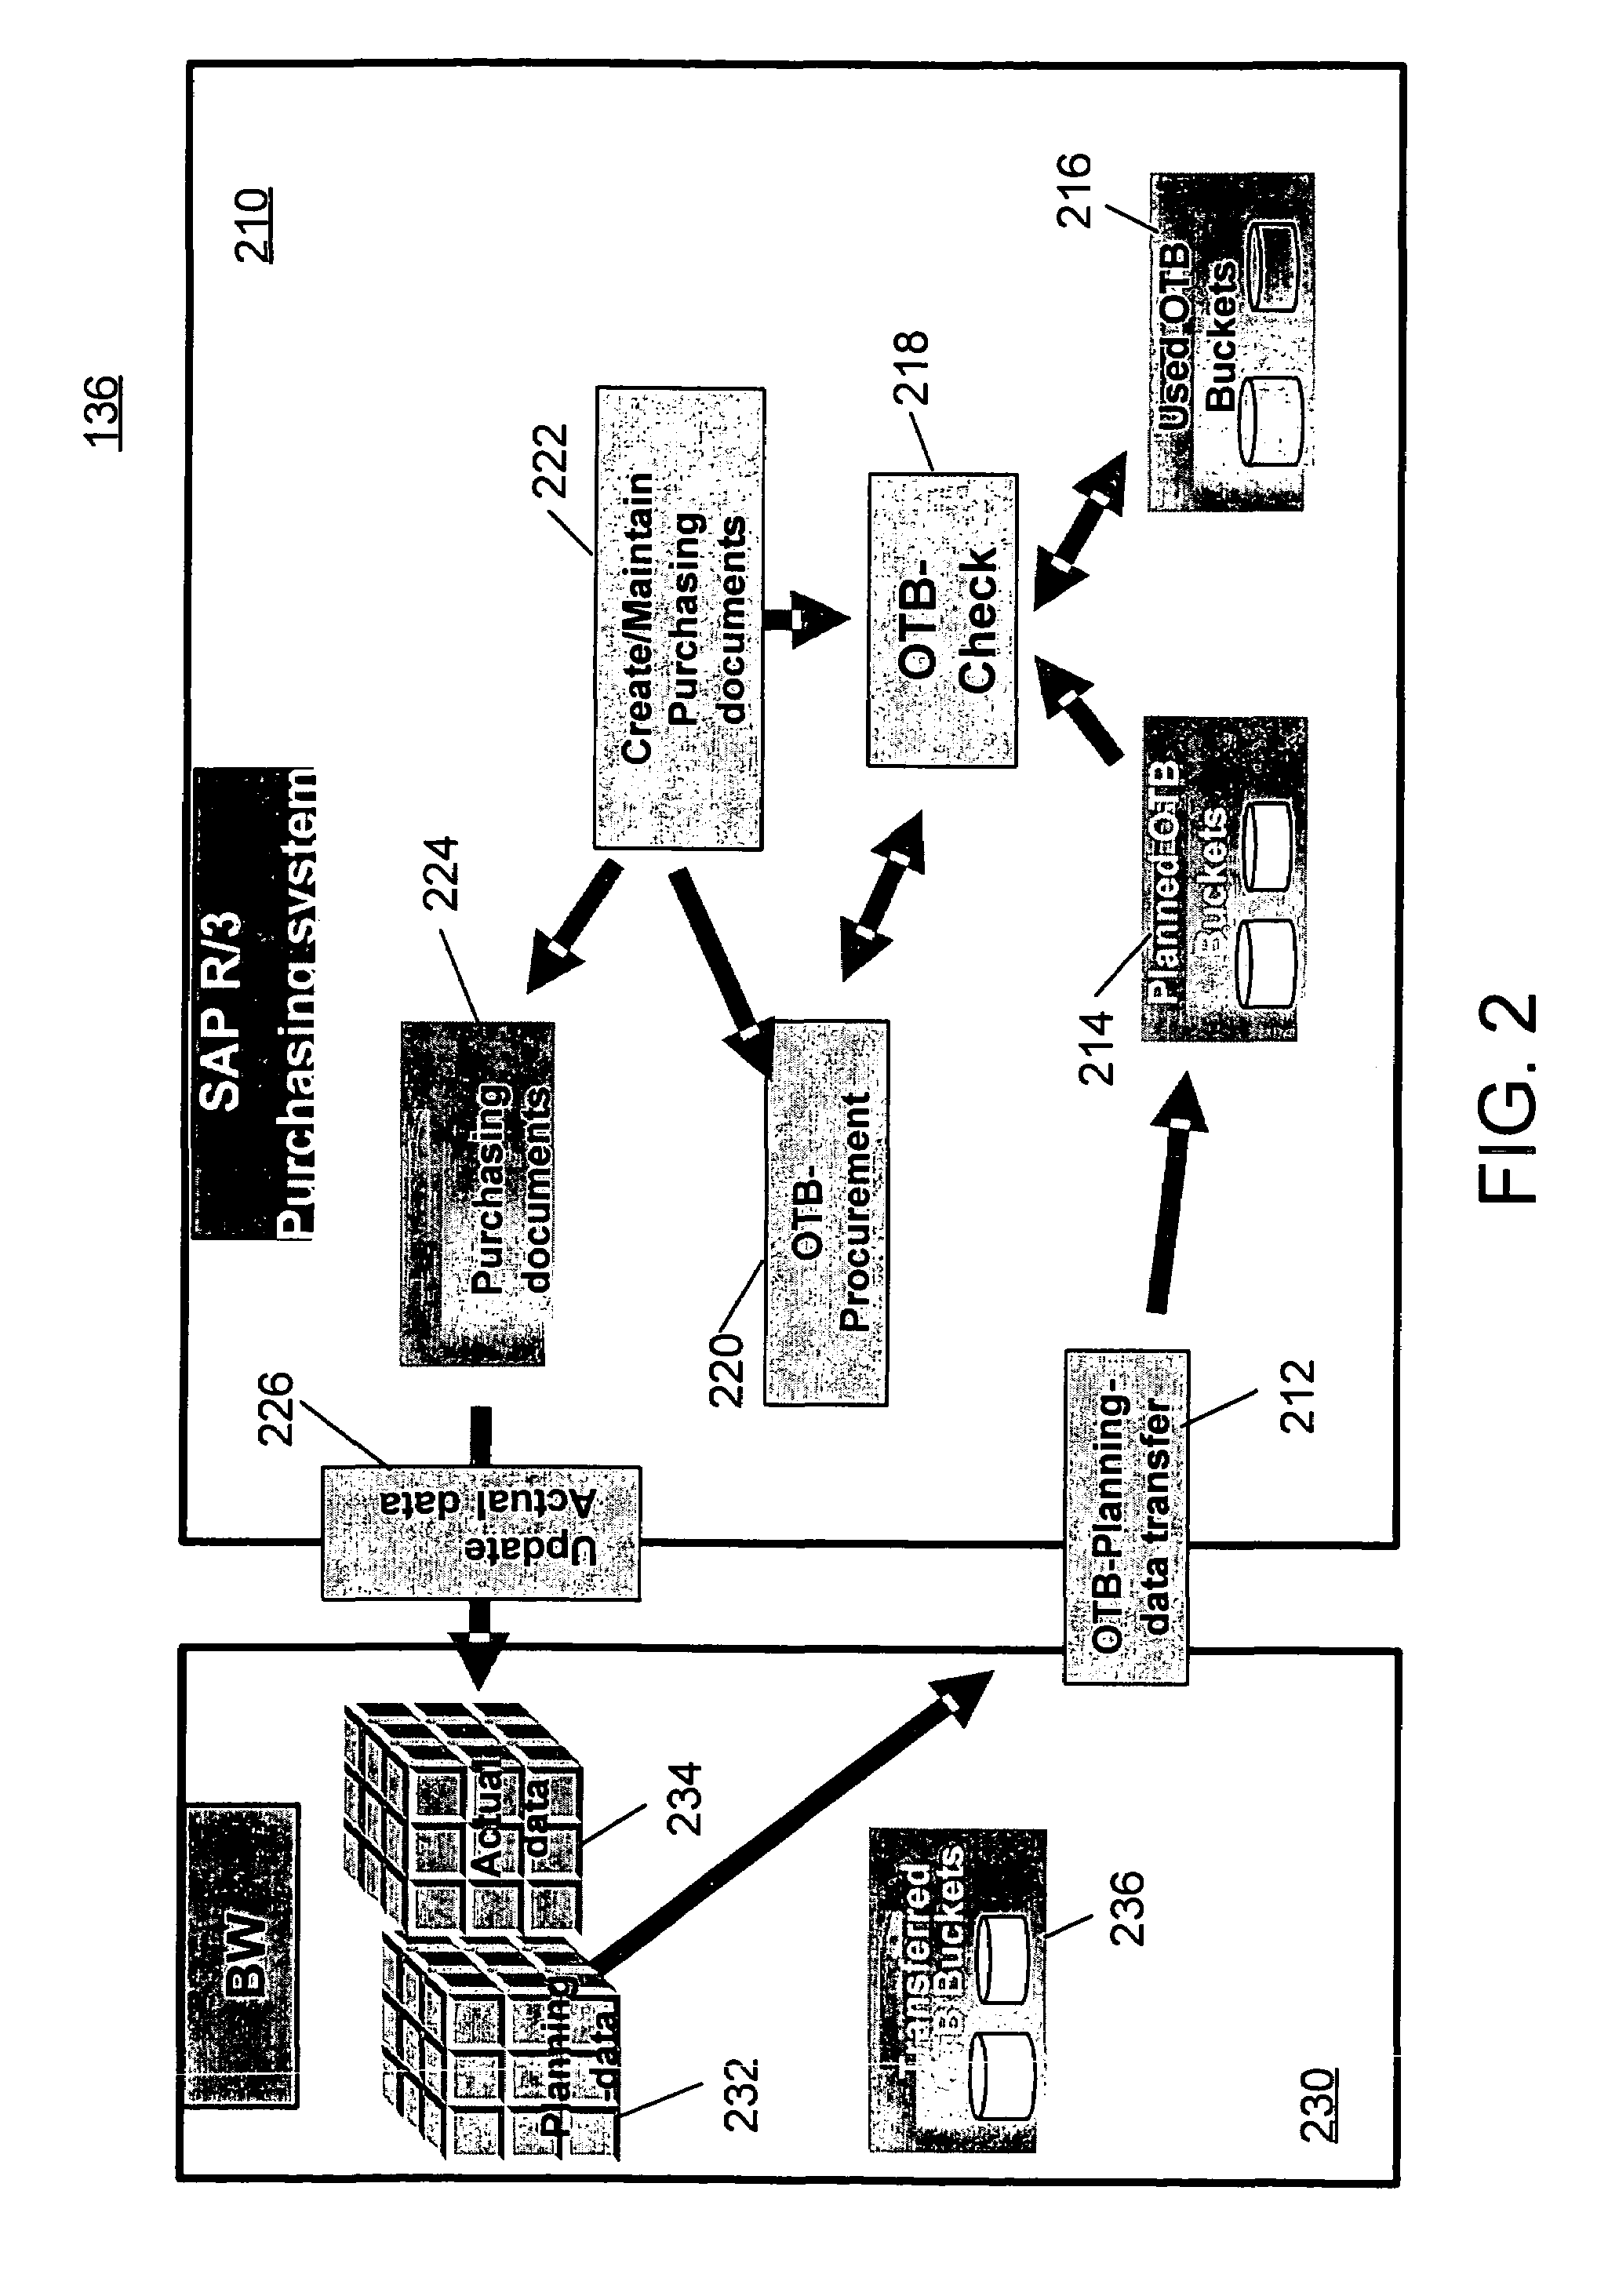 System and method of efficient scheduling and processing of purchase orders